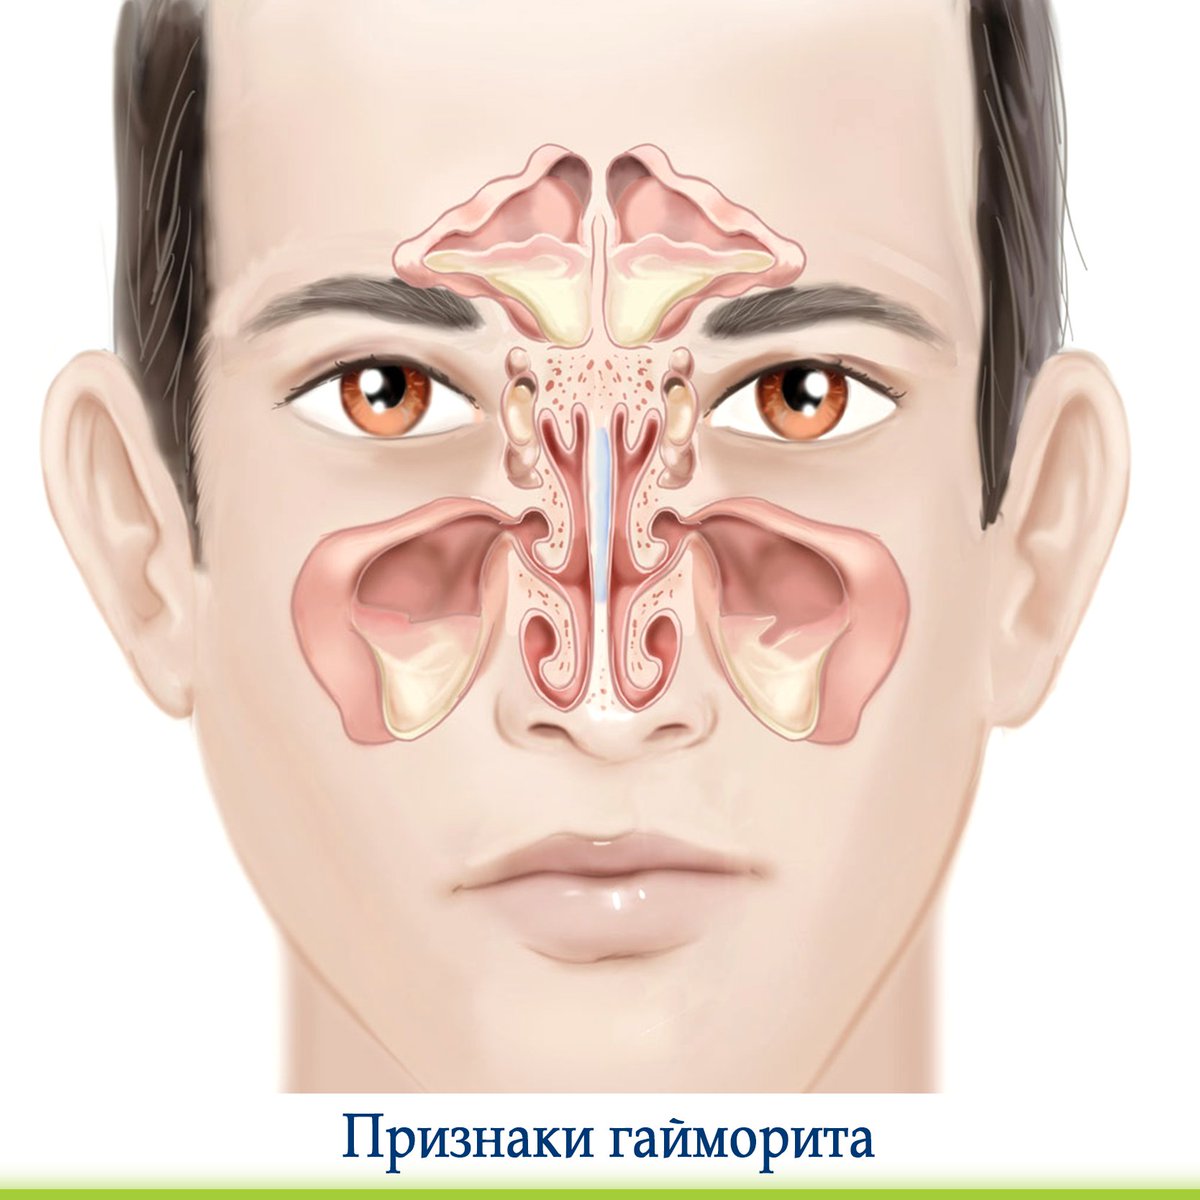 Cellulitis Symptoms Nose The Request Could Not Be Satisfied